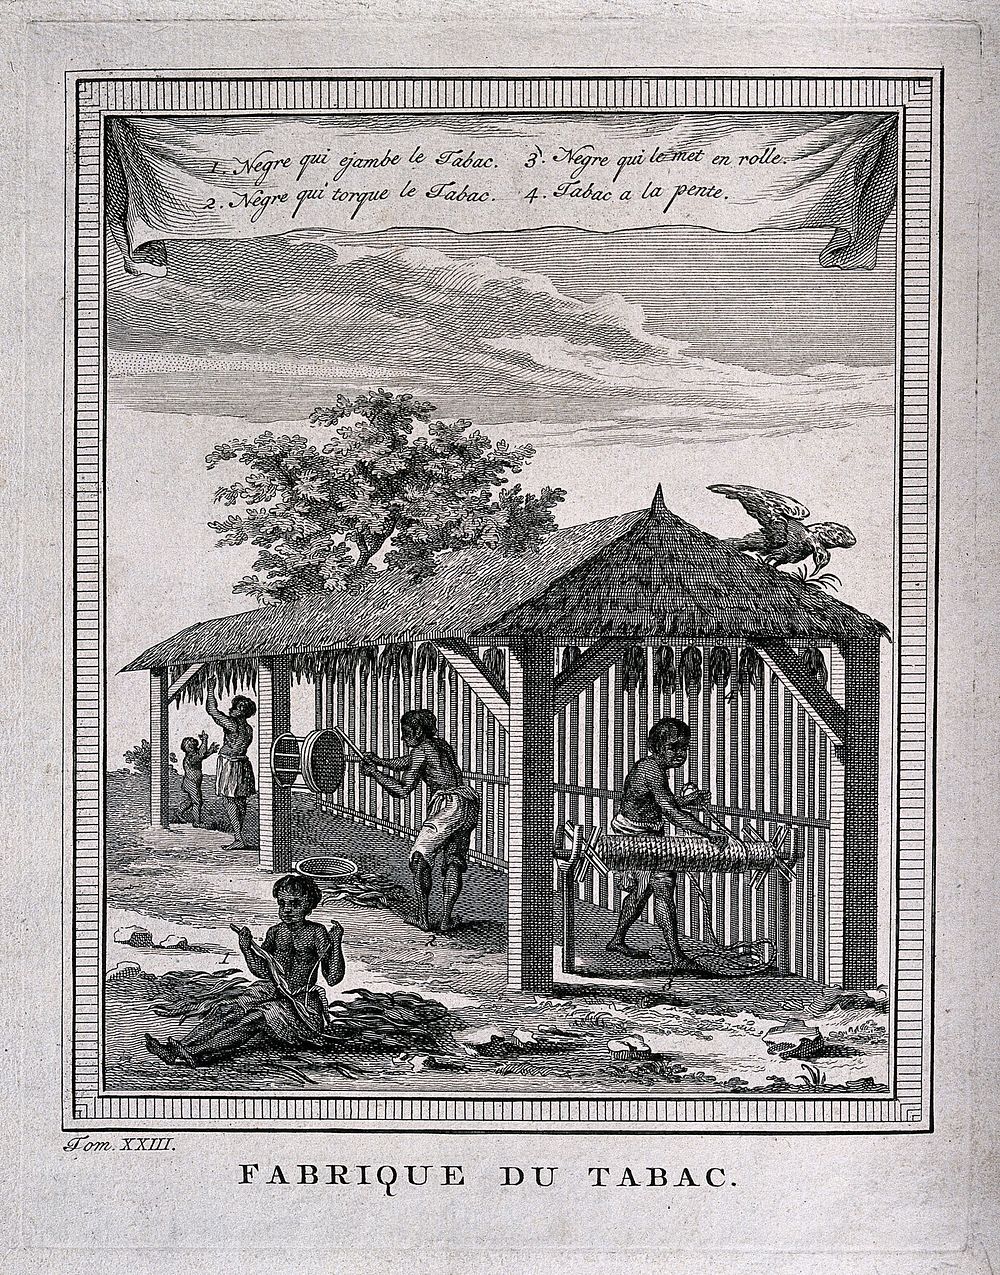 Tobacco plantation workers curing and preparing tobacco under a shelter. Engraving, mid-18th century.